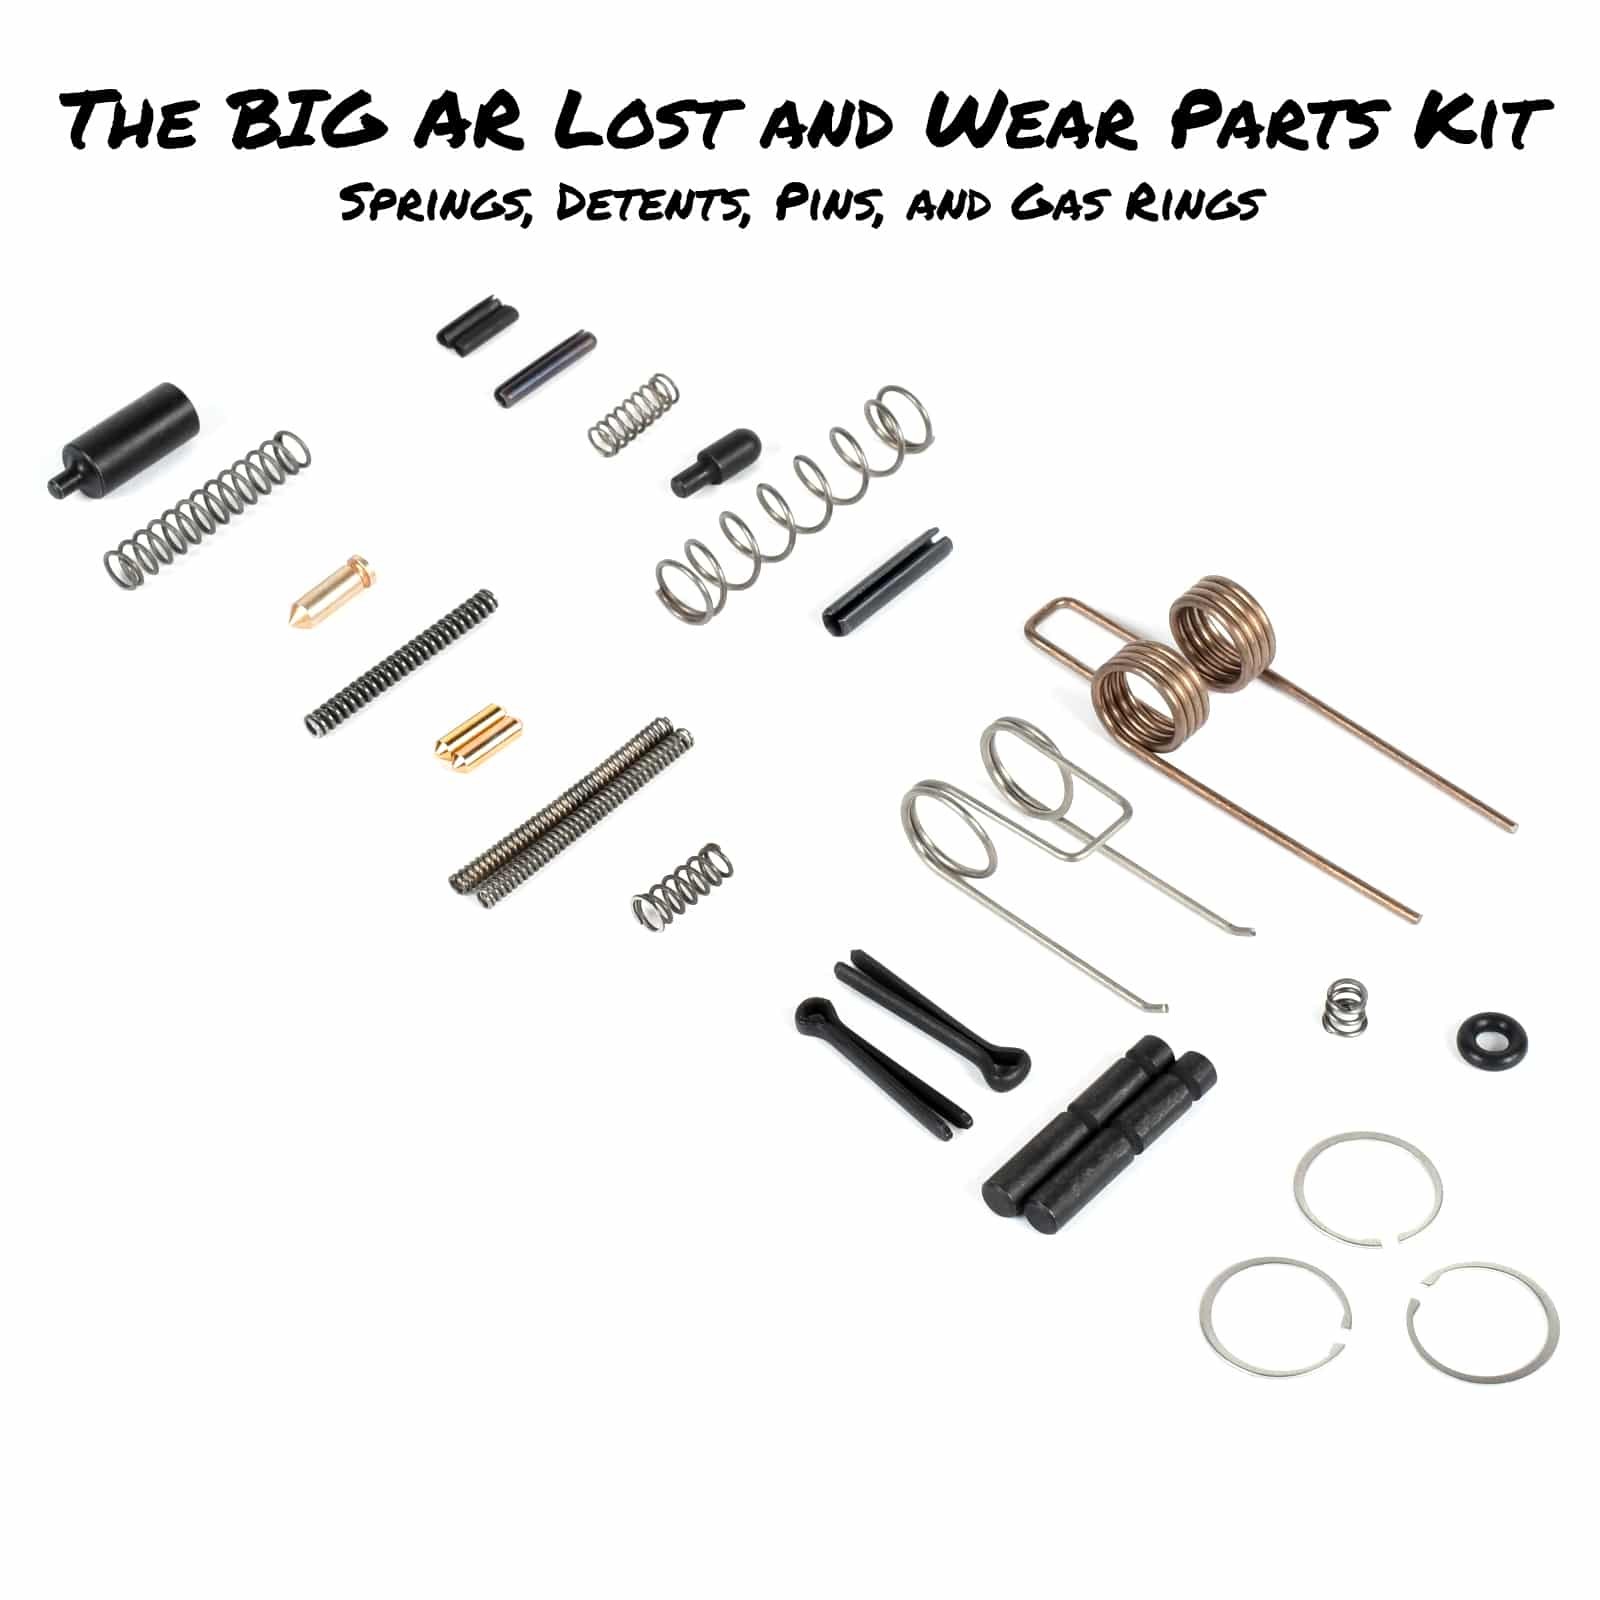 AT3™ MOTHERFU-BAG™ – The BIG AR-15 Lost Parts Kit – Springs, Detents, Wear Parts, and More